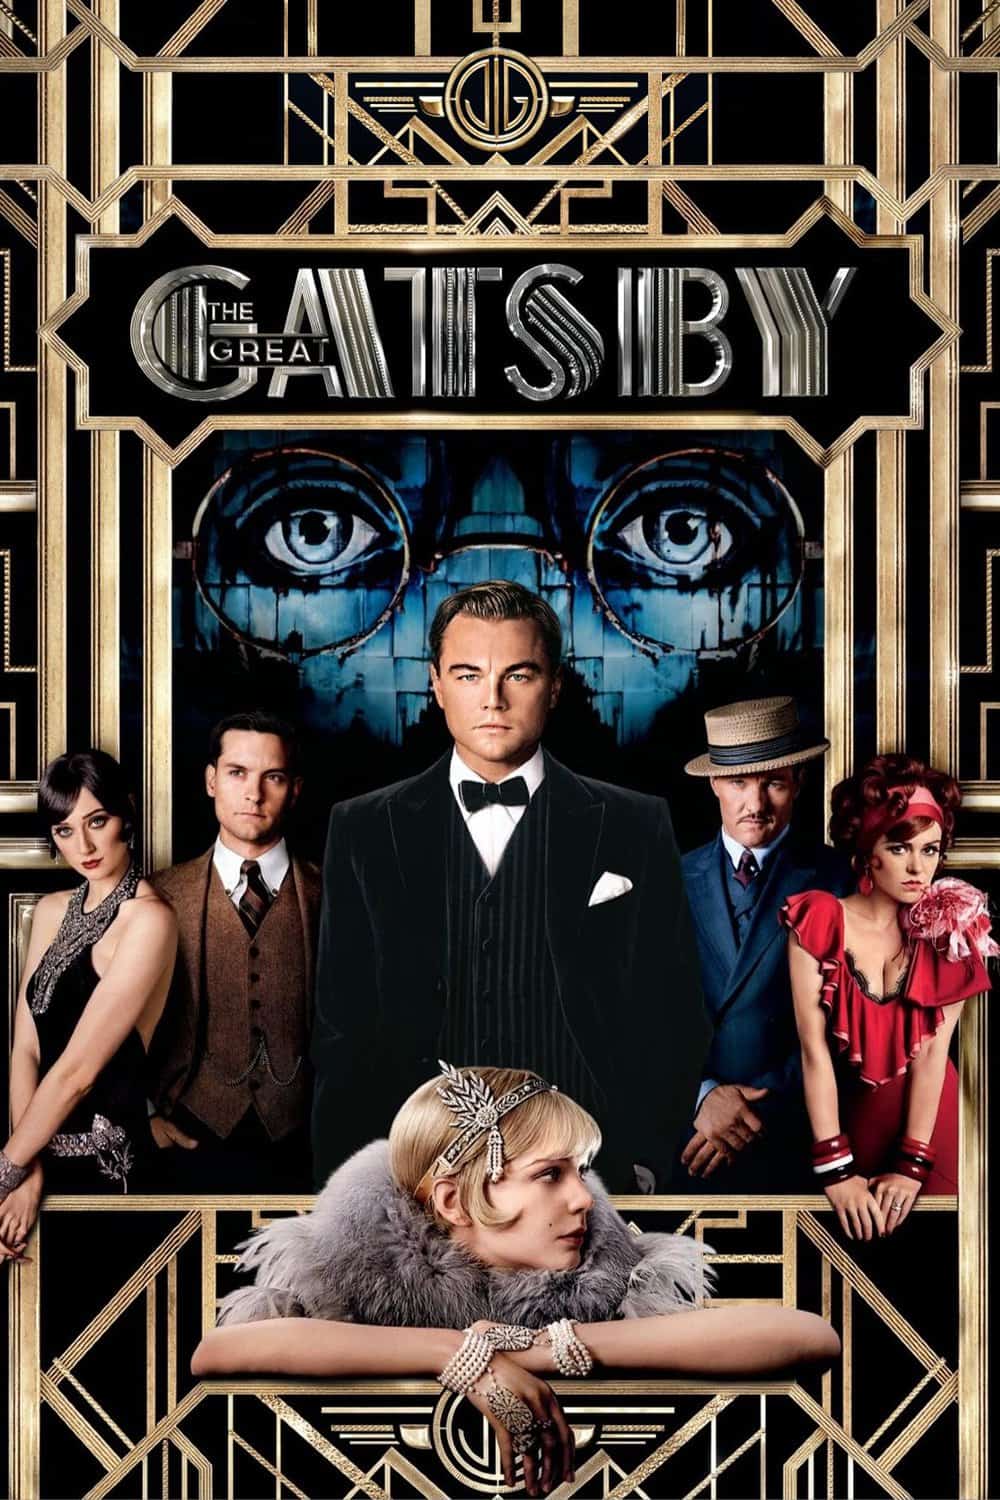 The Great Gatsby, 2013 